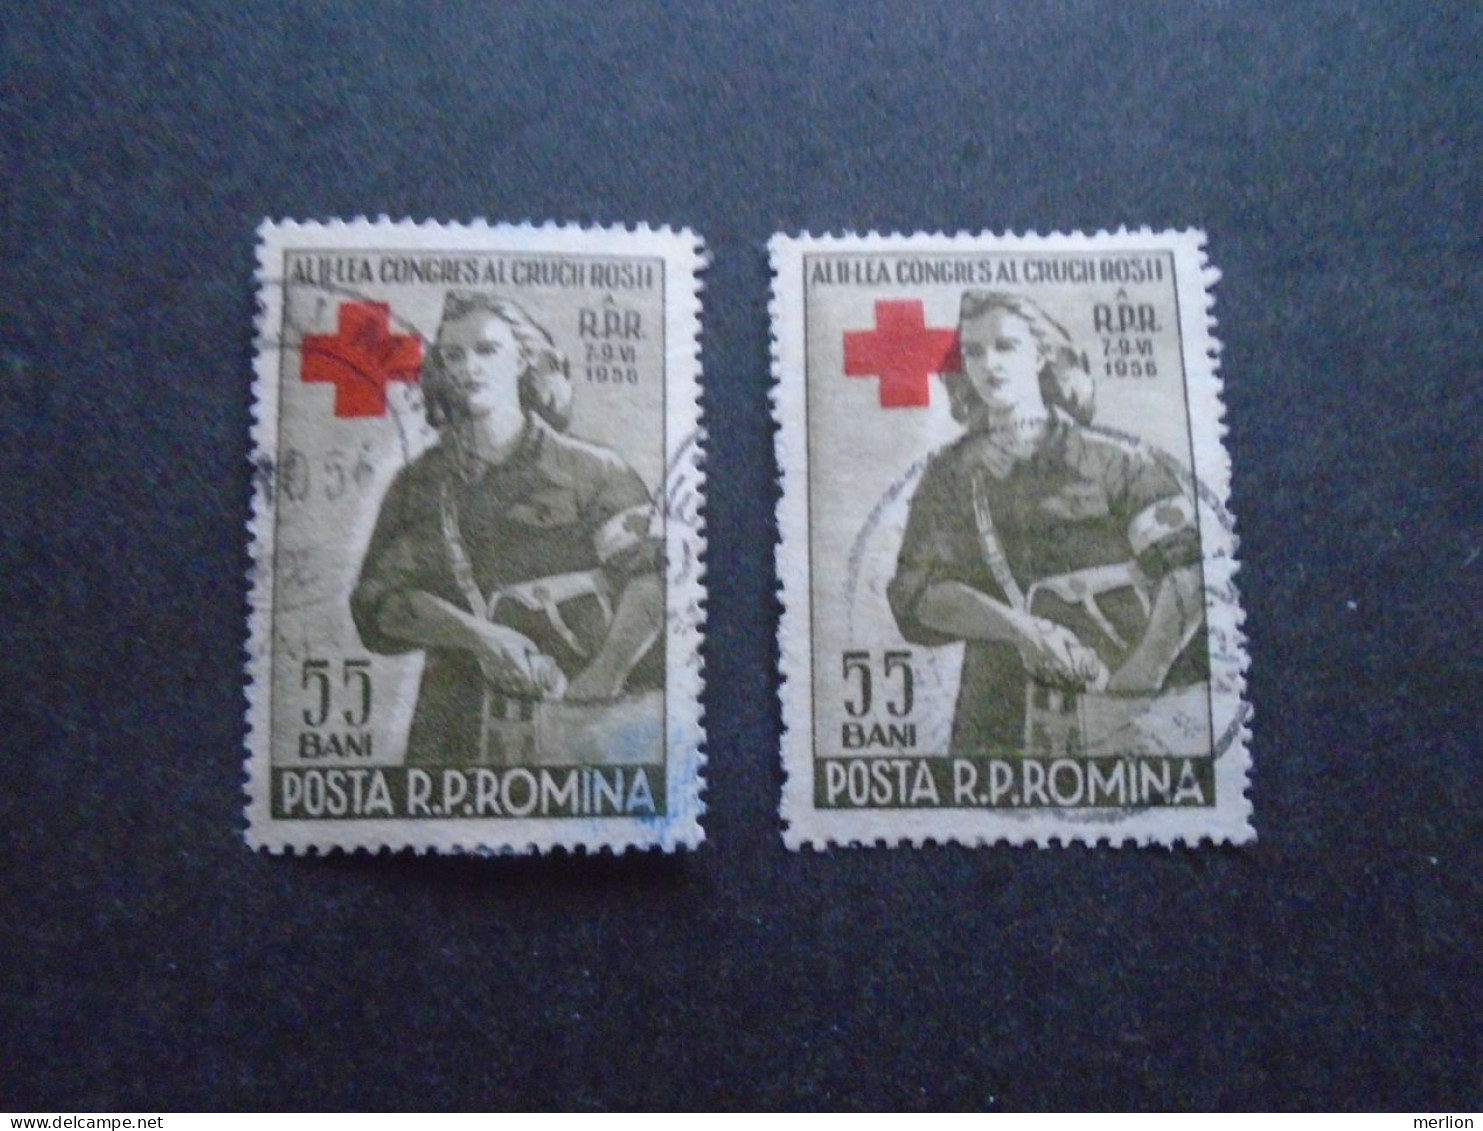 D202283   Romania - 1956   -  Lot Of 2  Used Stamps   Red Cross Croix Rouge  Congress   1579 - Used Stamps